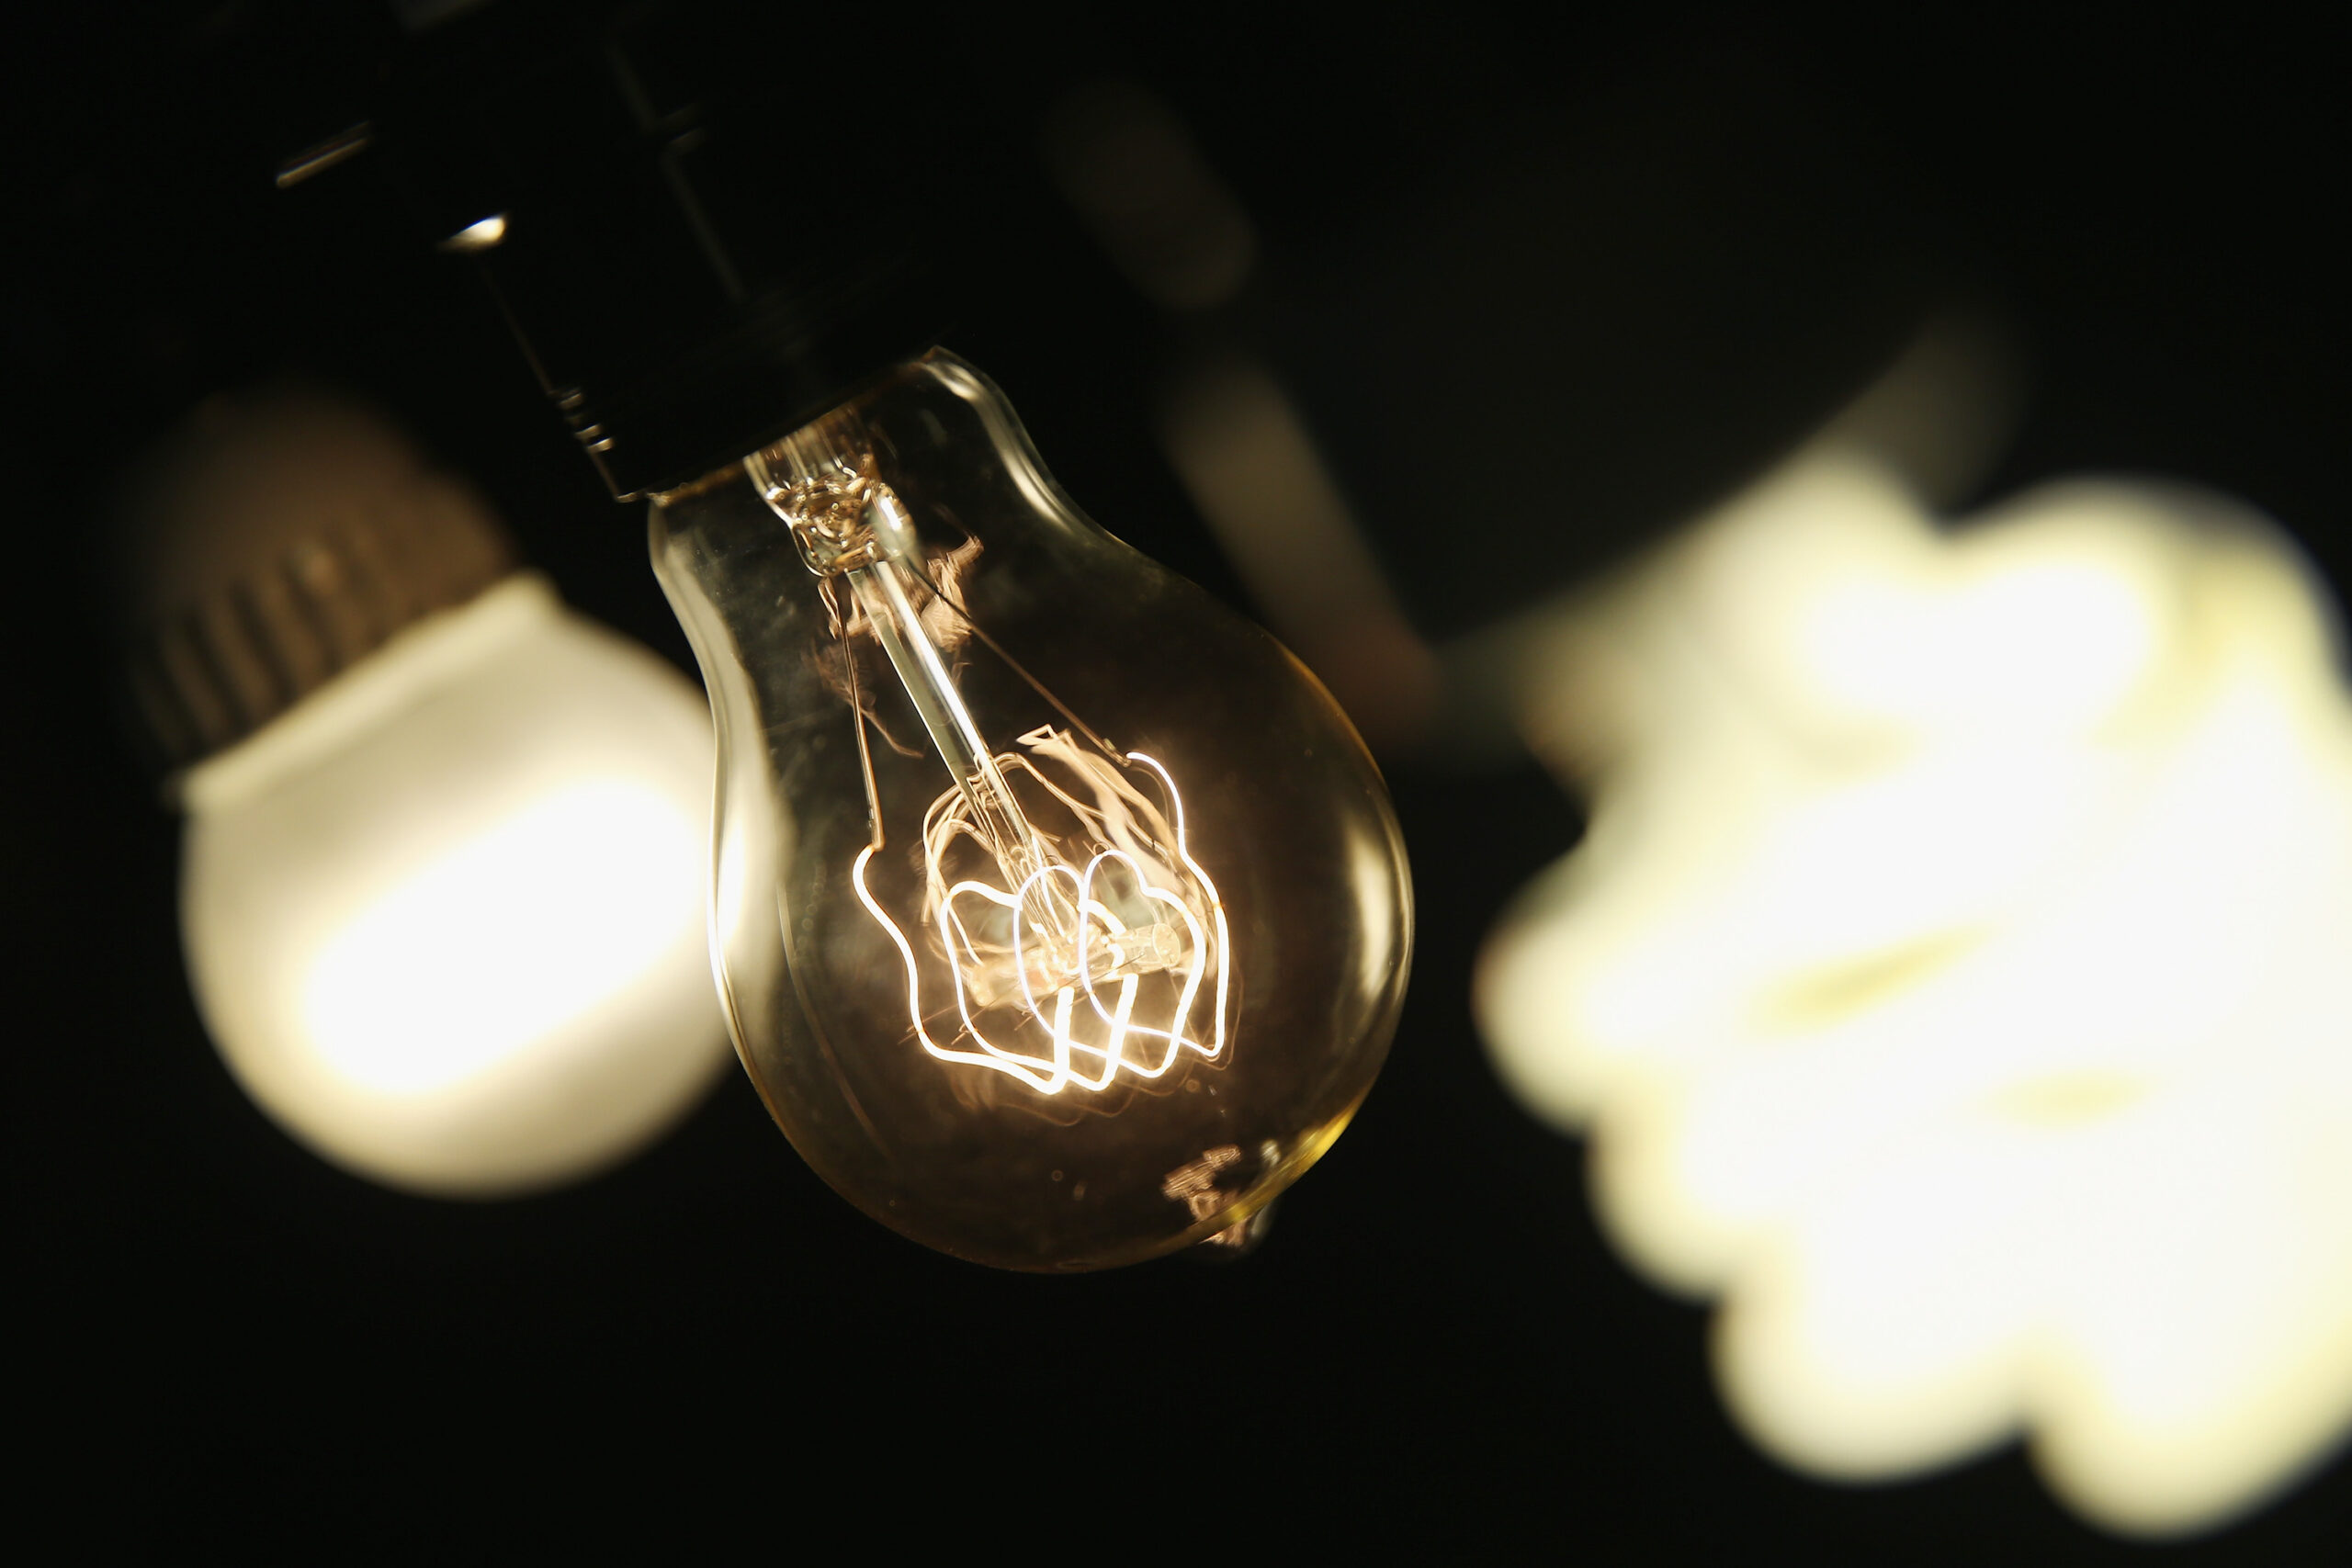 Your old, traditional light bulb is going dark